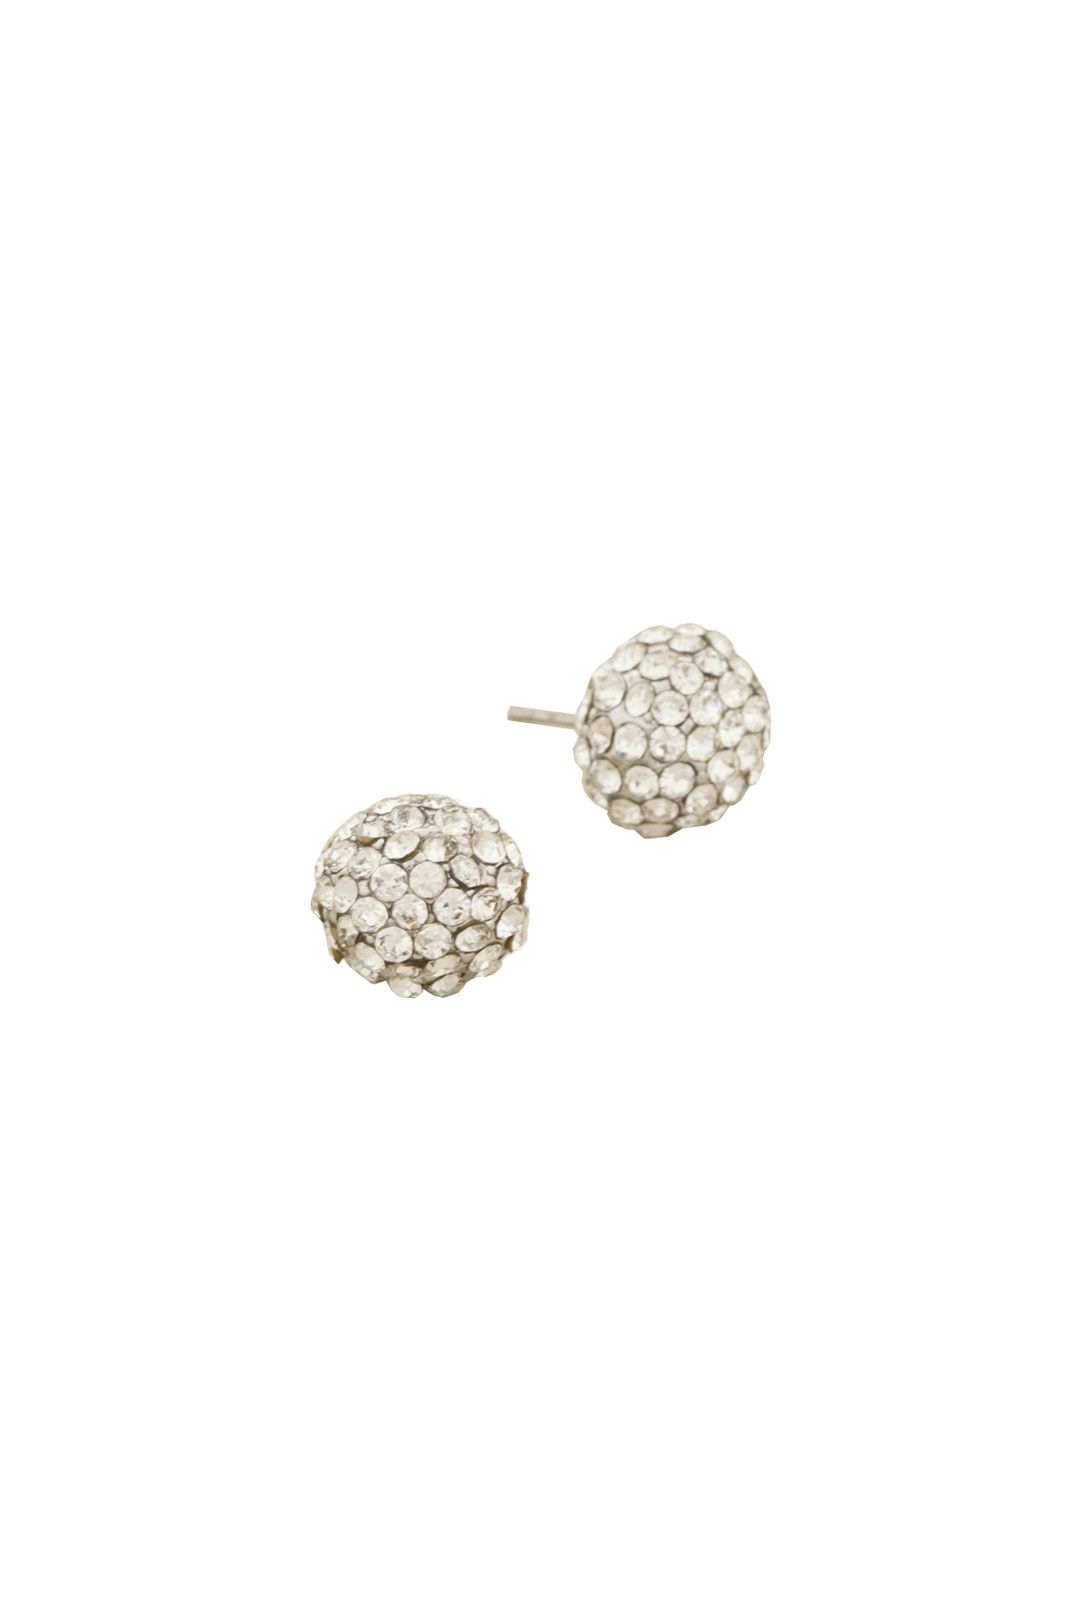 Adorne - Diamante Ball Stud Earring - Silver - Front